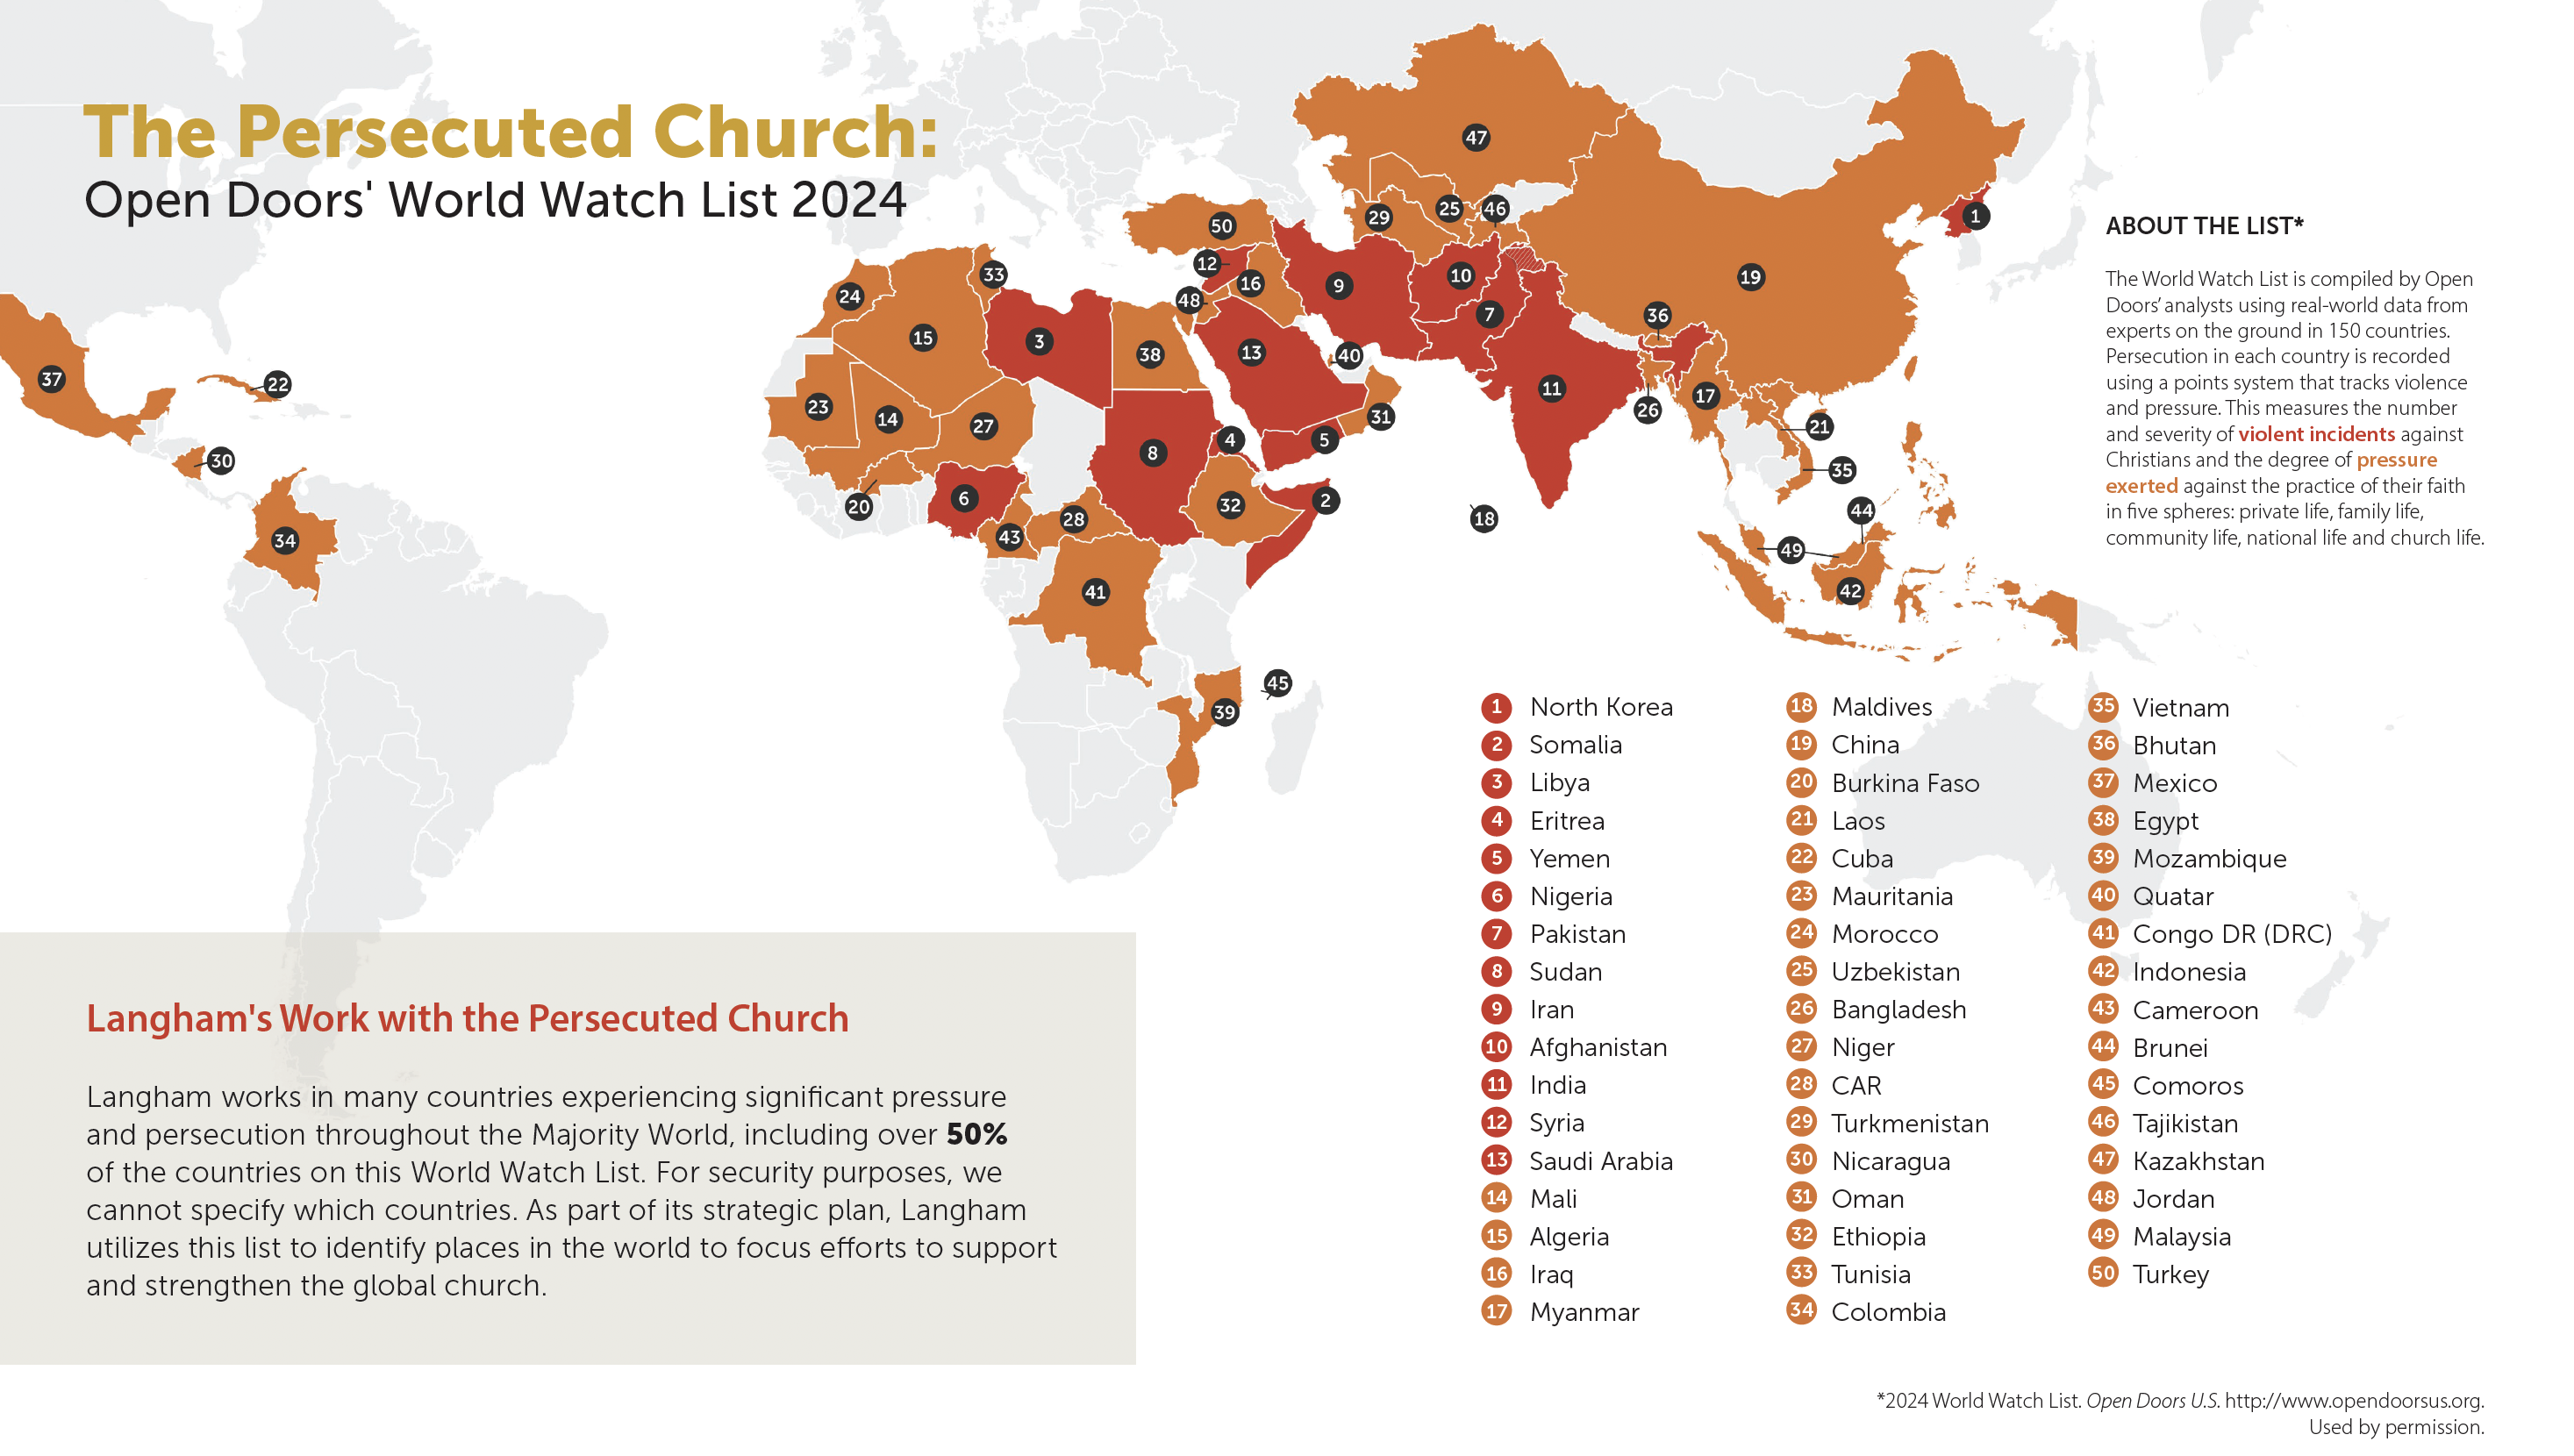 A map showing Christian persecution around the world, according to the Open Doors' World Watch List 2024.